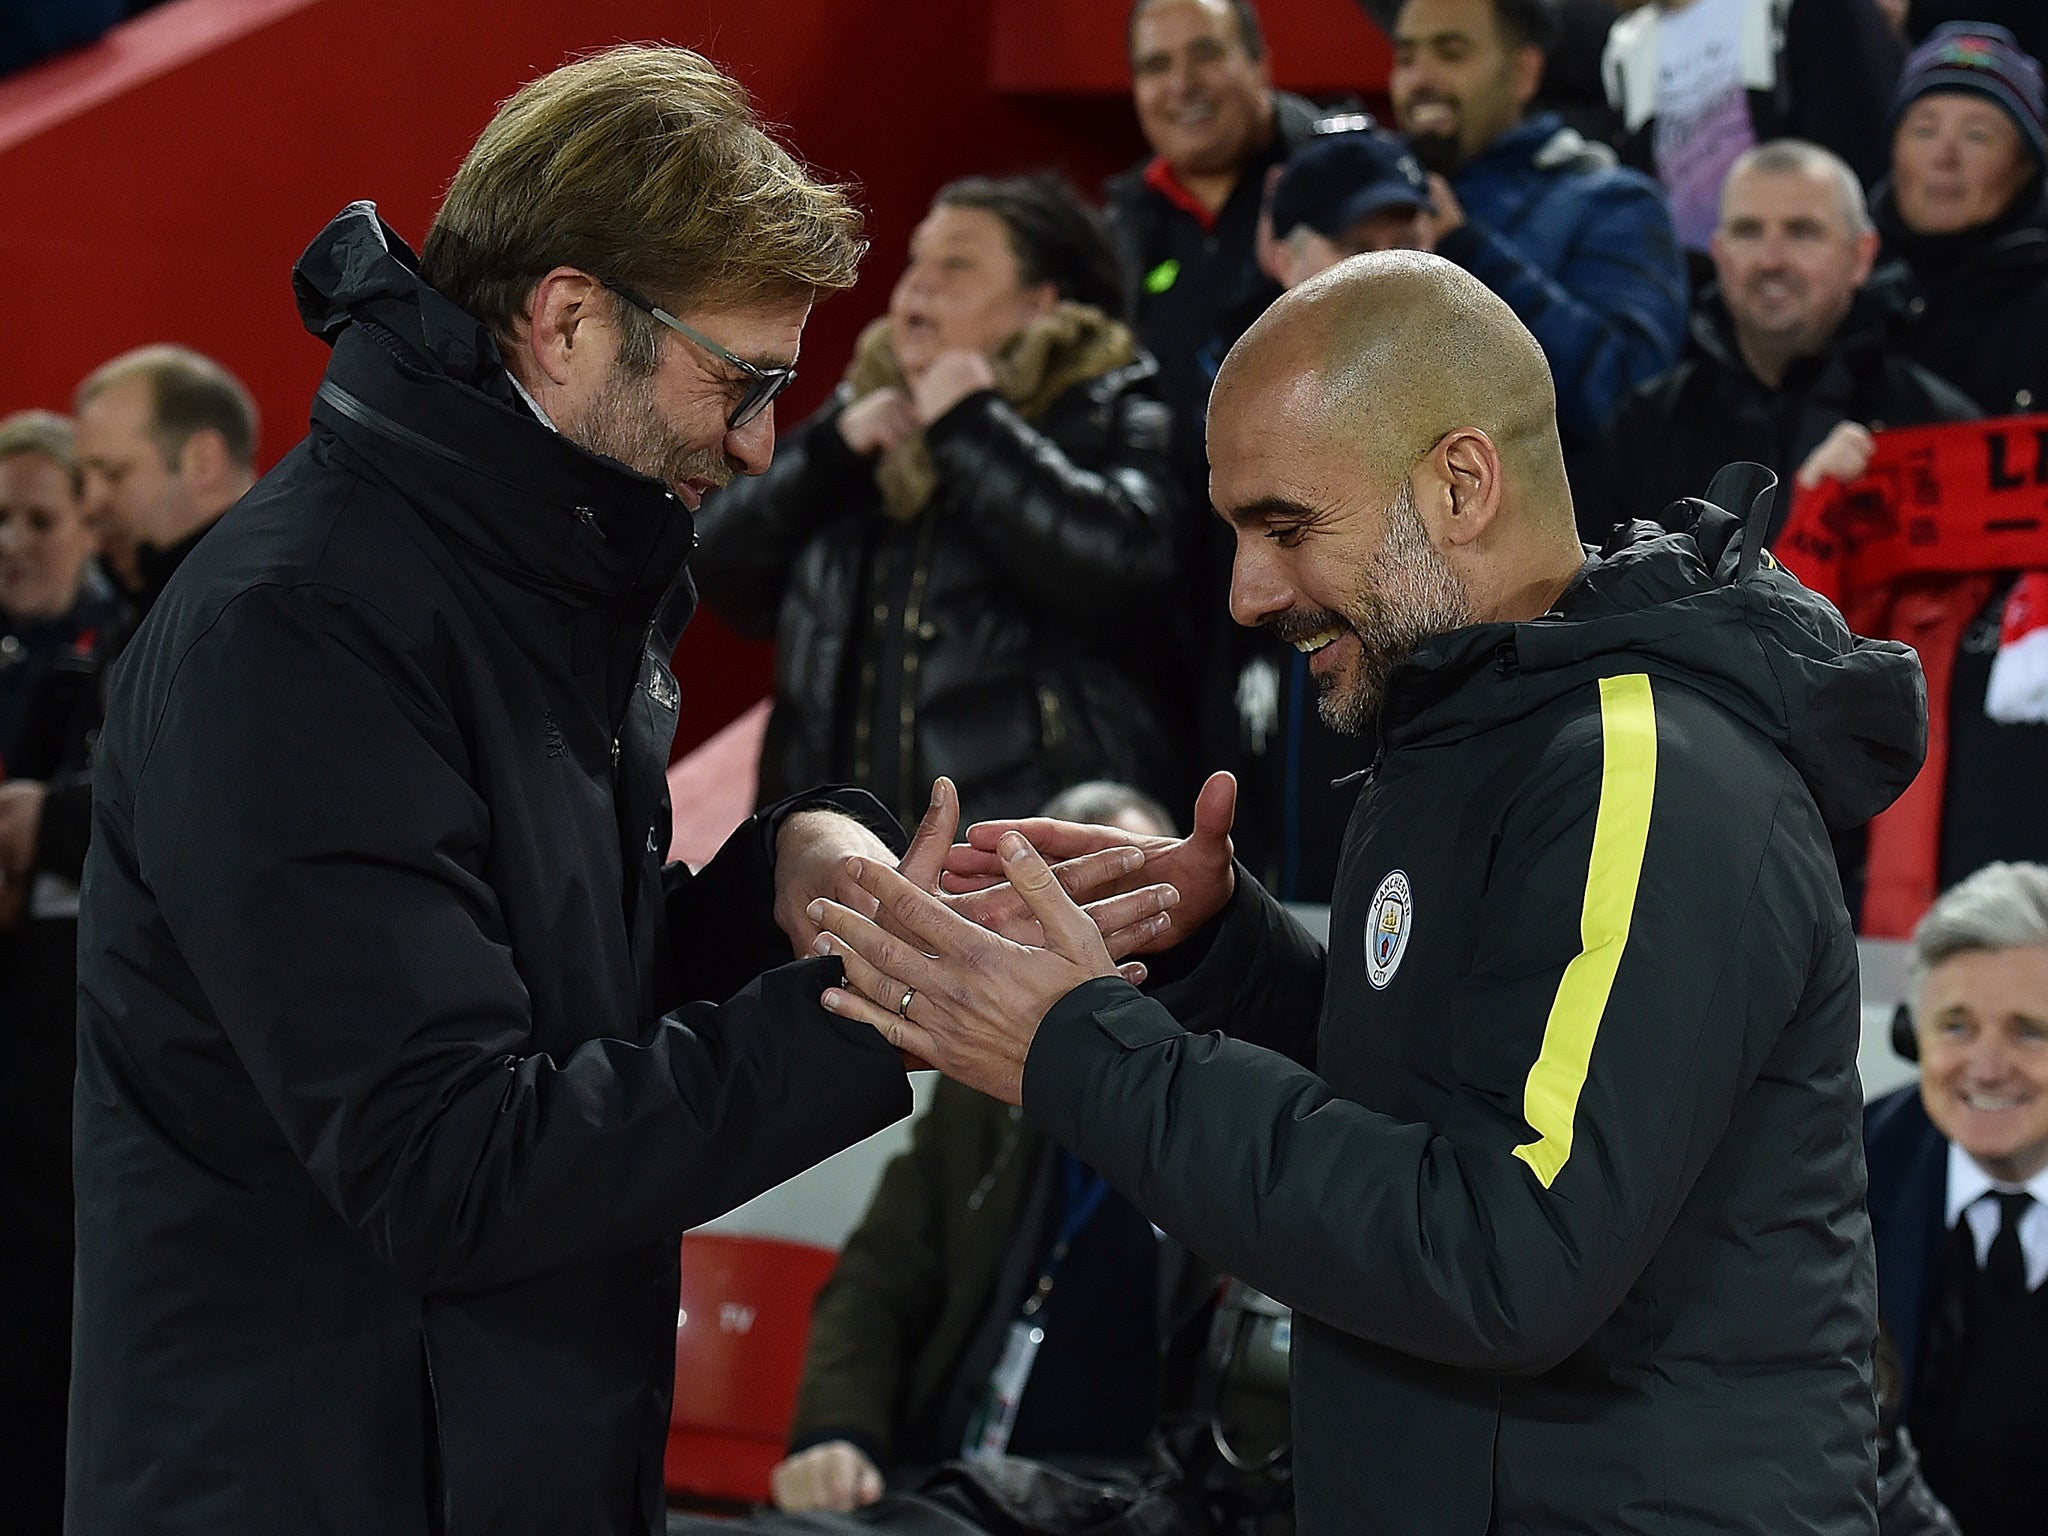 Jurgen Klopp and Pep Guardiola know each other well from their time in the Bundesliga